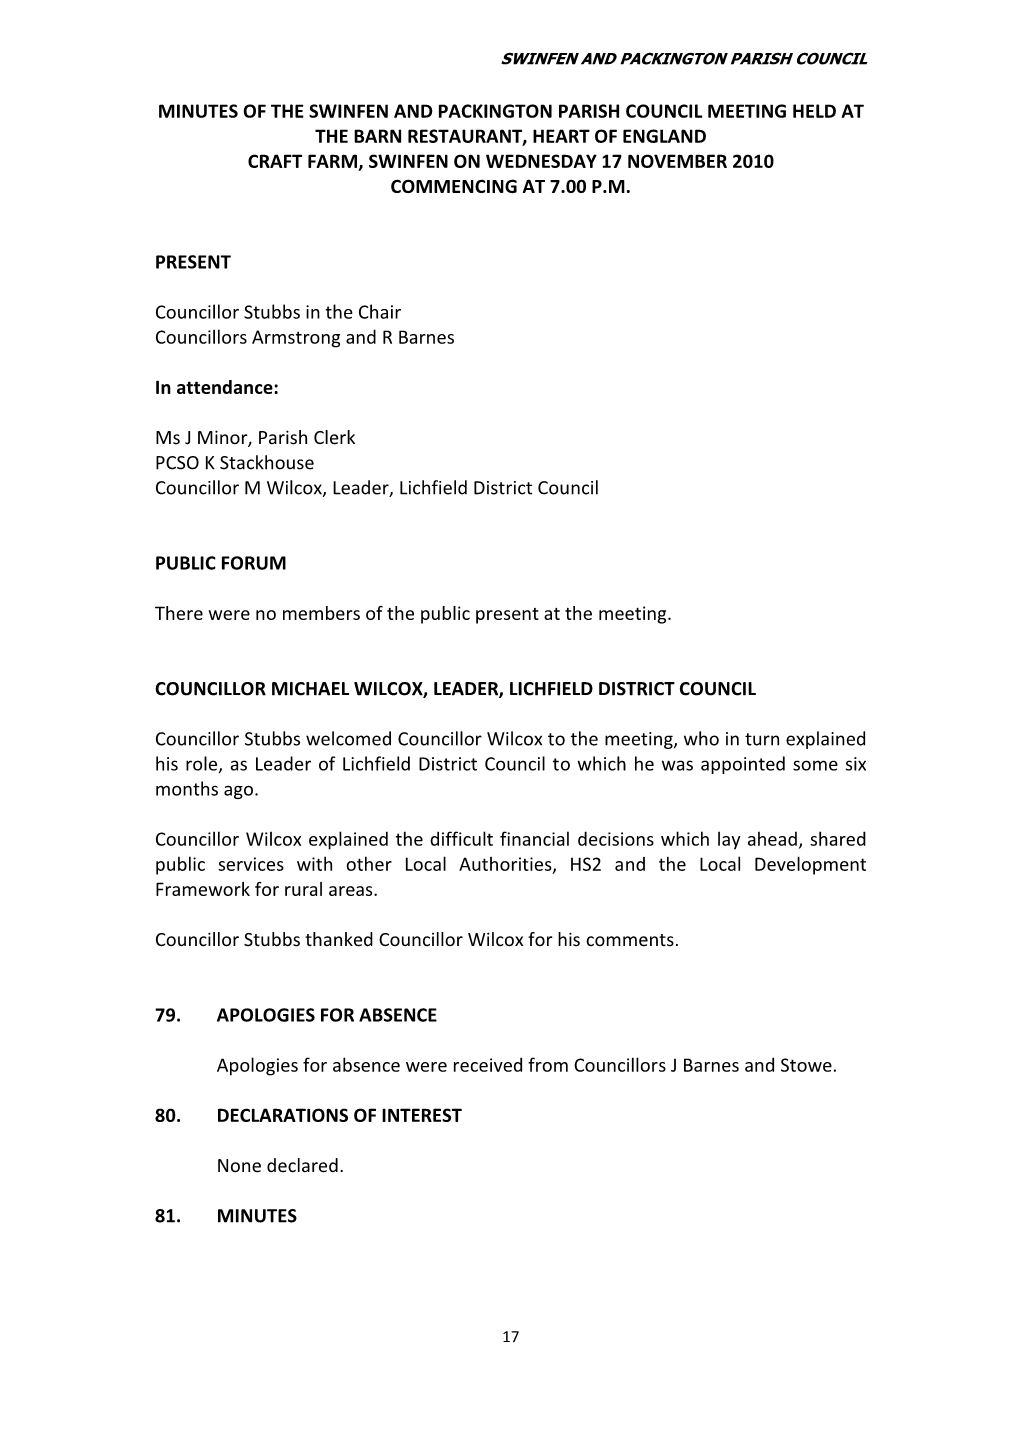 Minutes of the Swinfen and Packington Parish Council